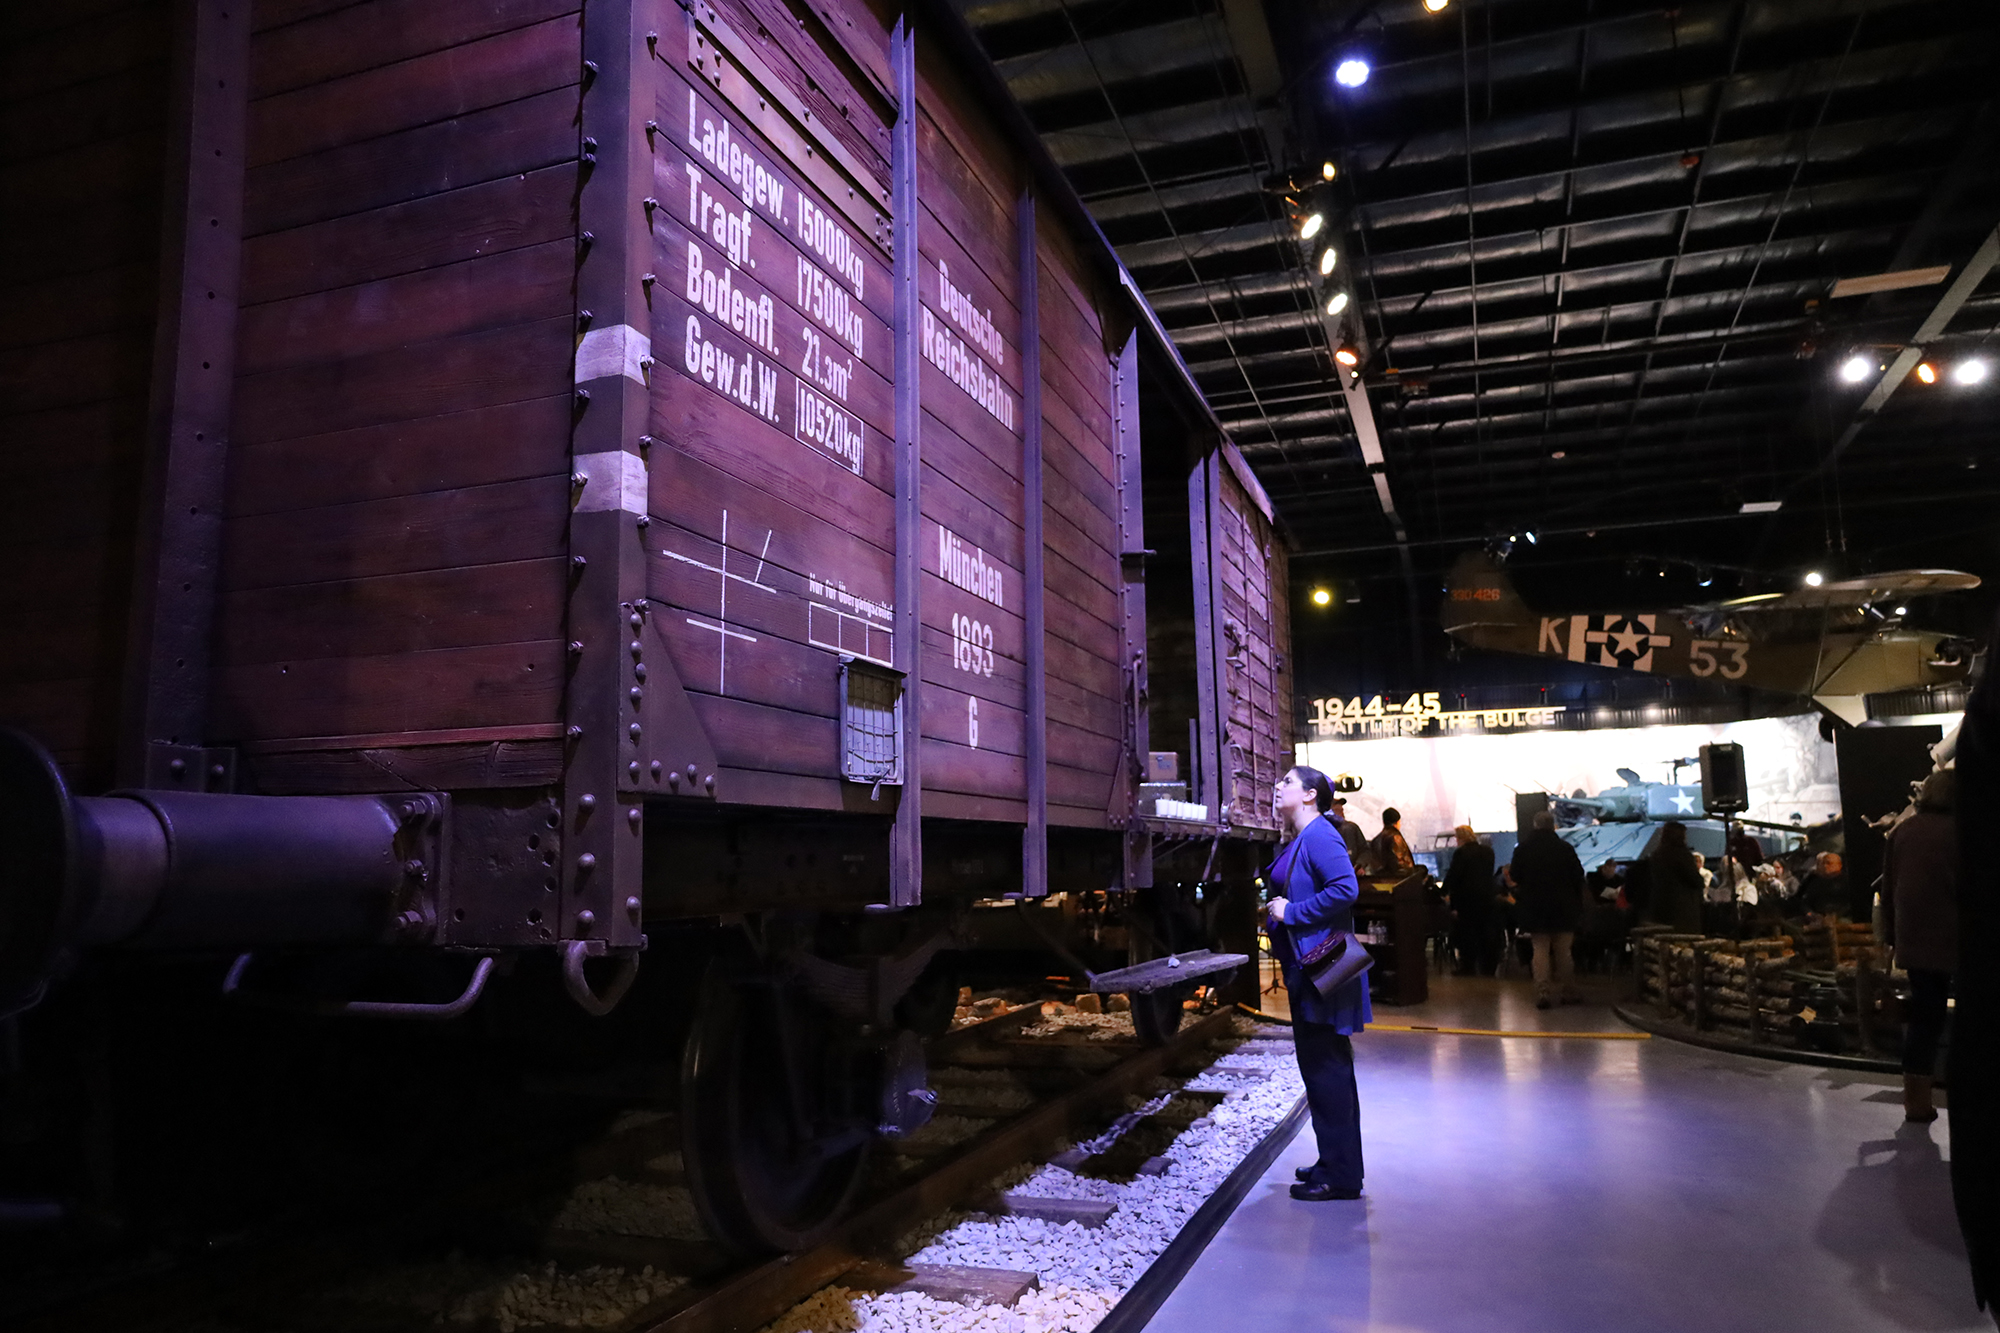 Railcar marks the start of American Heritage Museum’s Holocaust exhibit